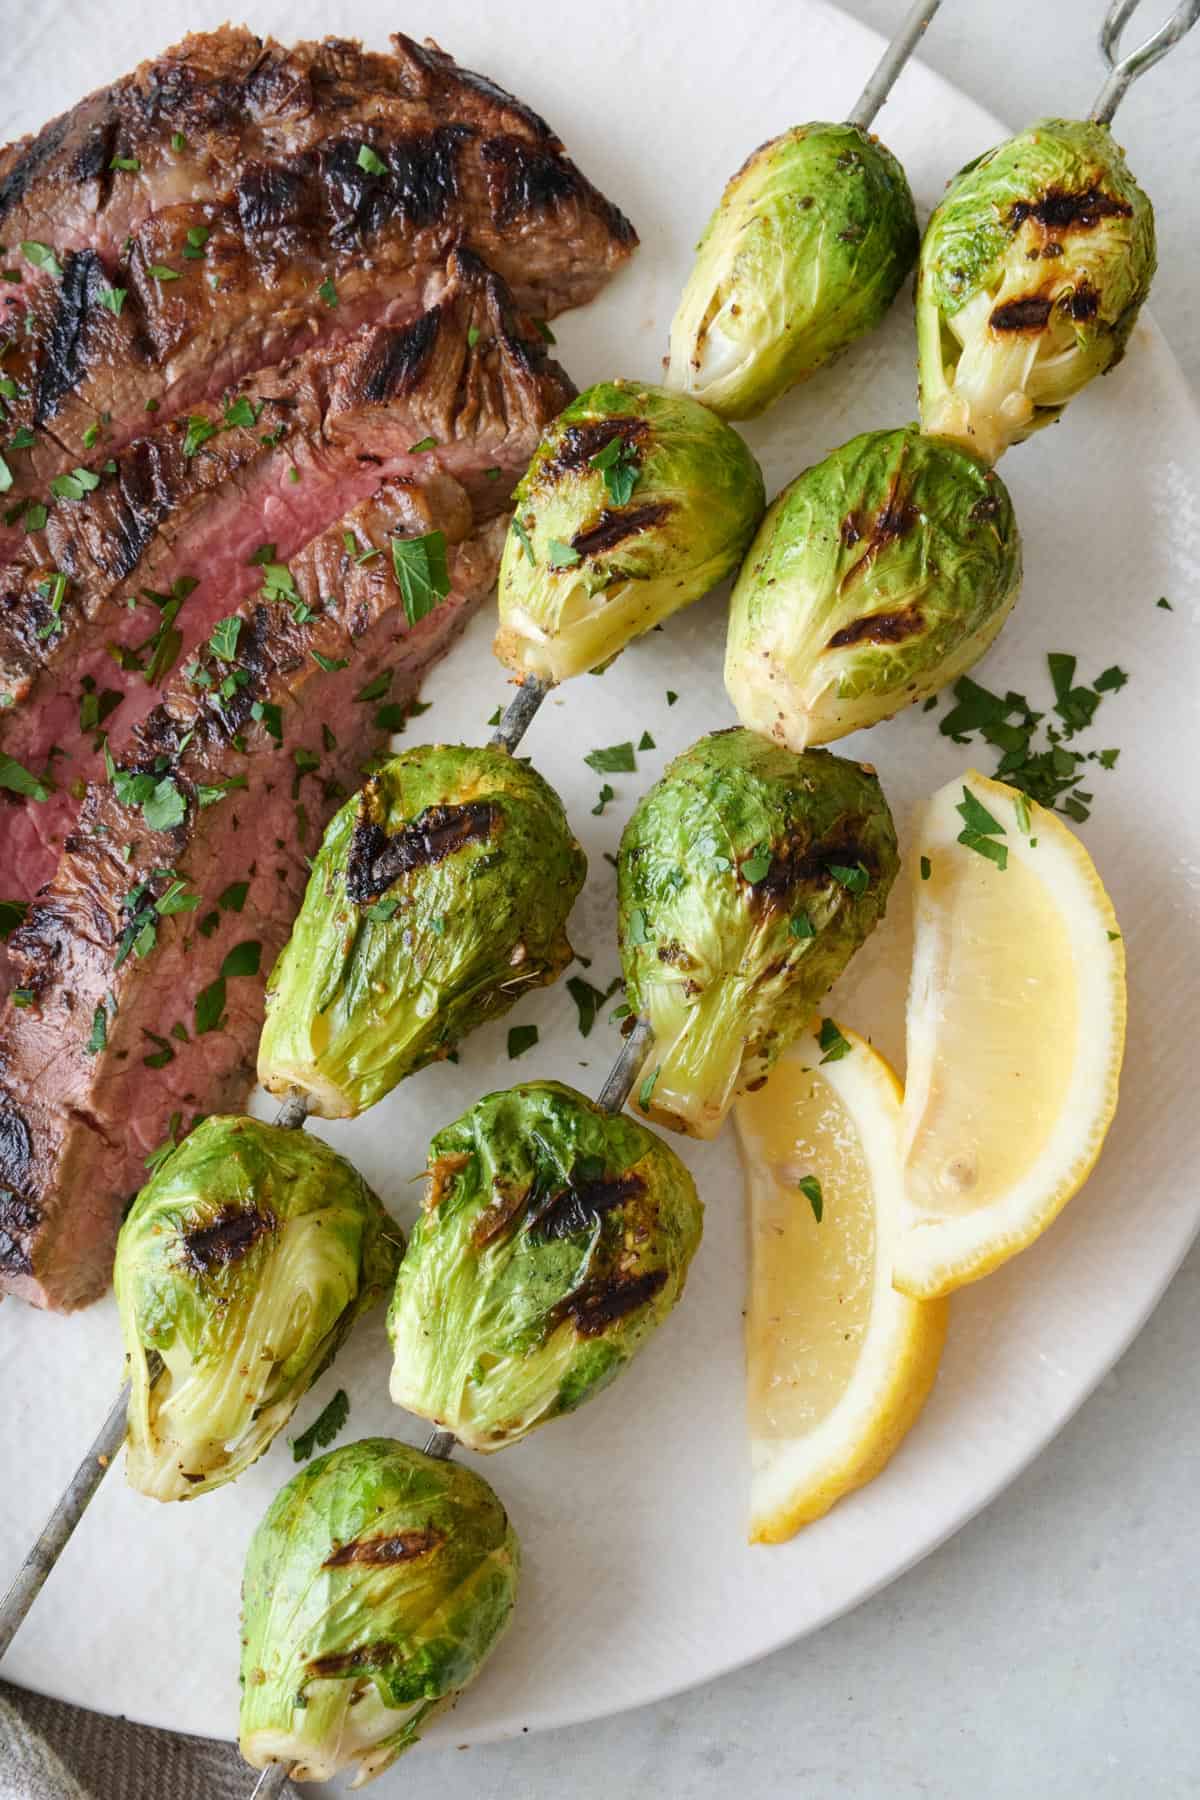 Two brussel sprouts skewers on a plate with sliced steak.